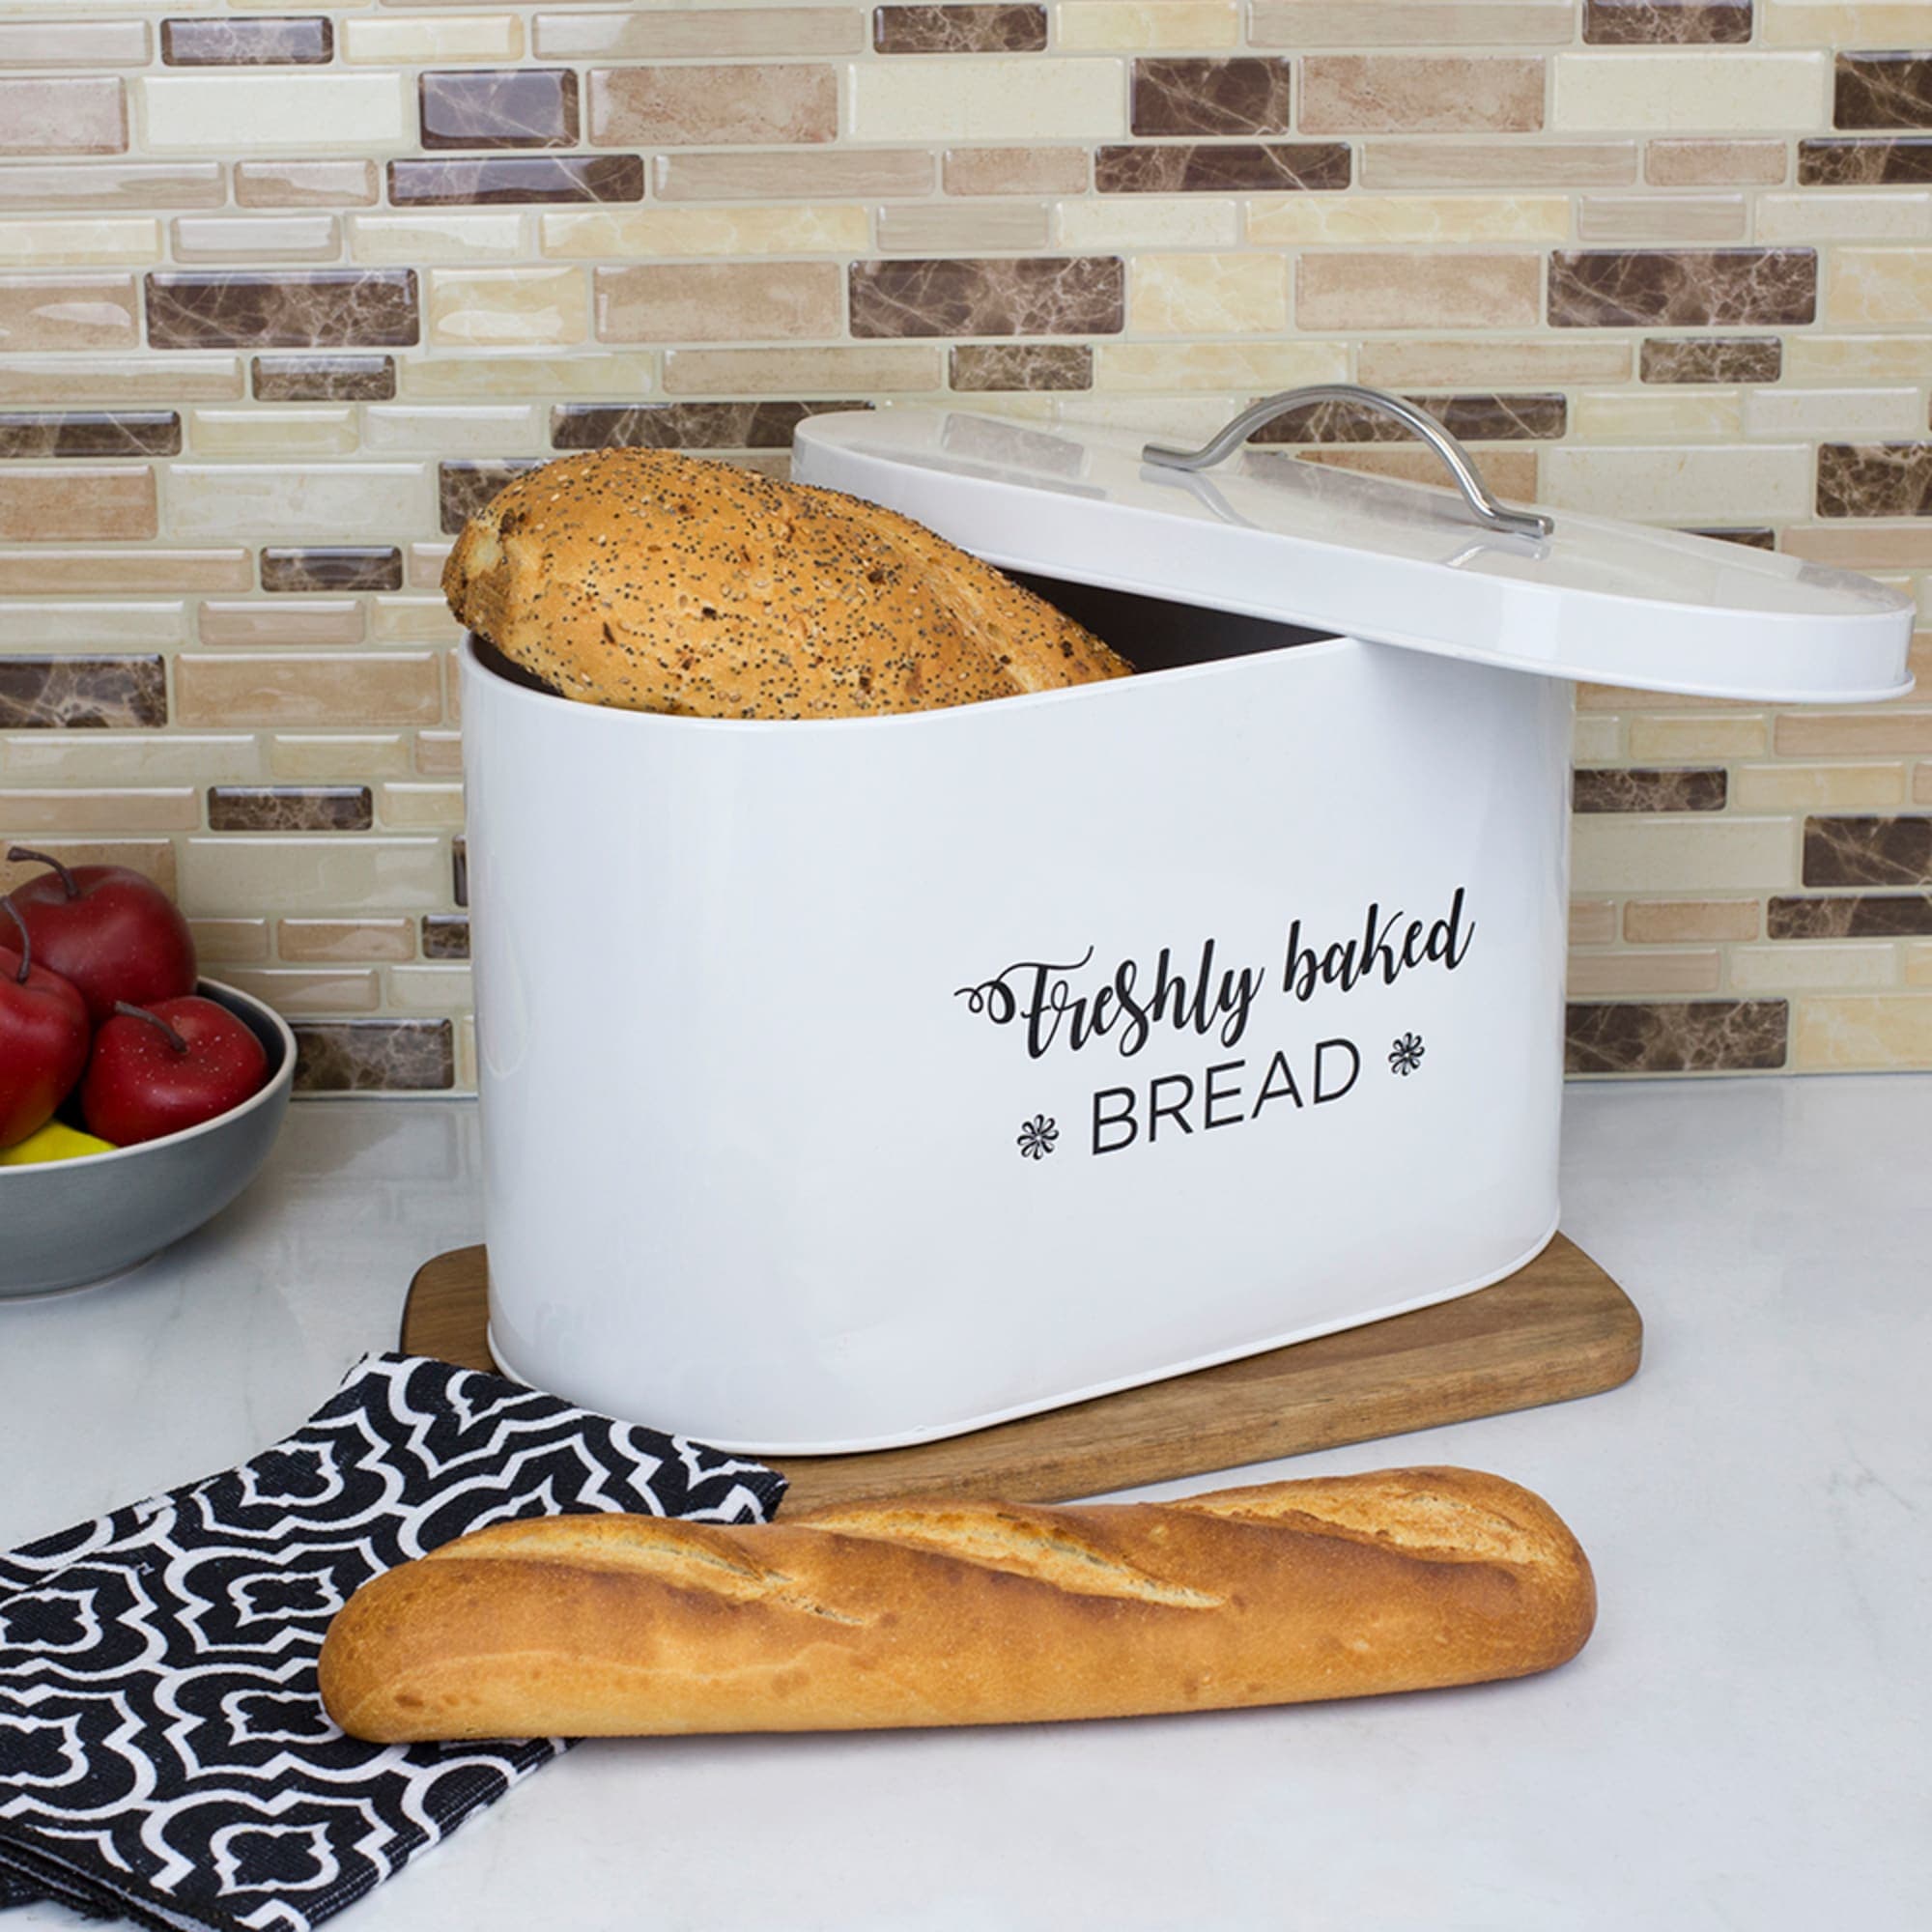 Home Basics Cuisine Collection Tin Bread Box $15 EACH, CASE PACK OF 4